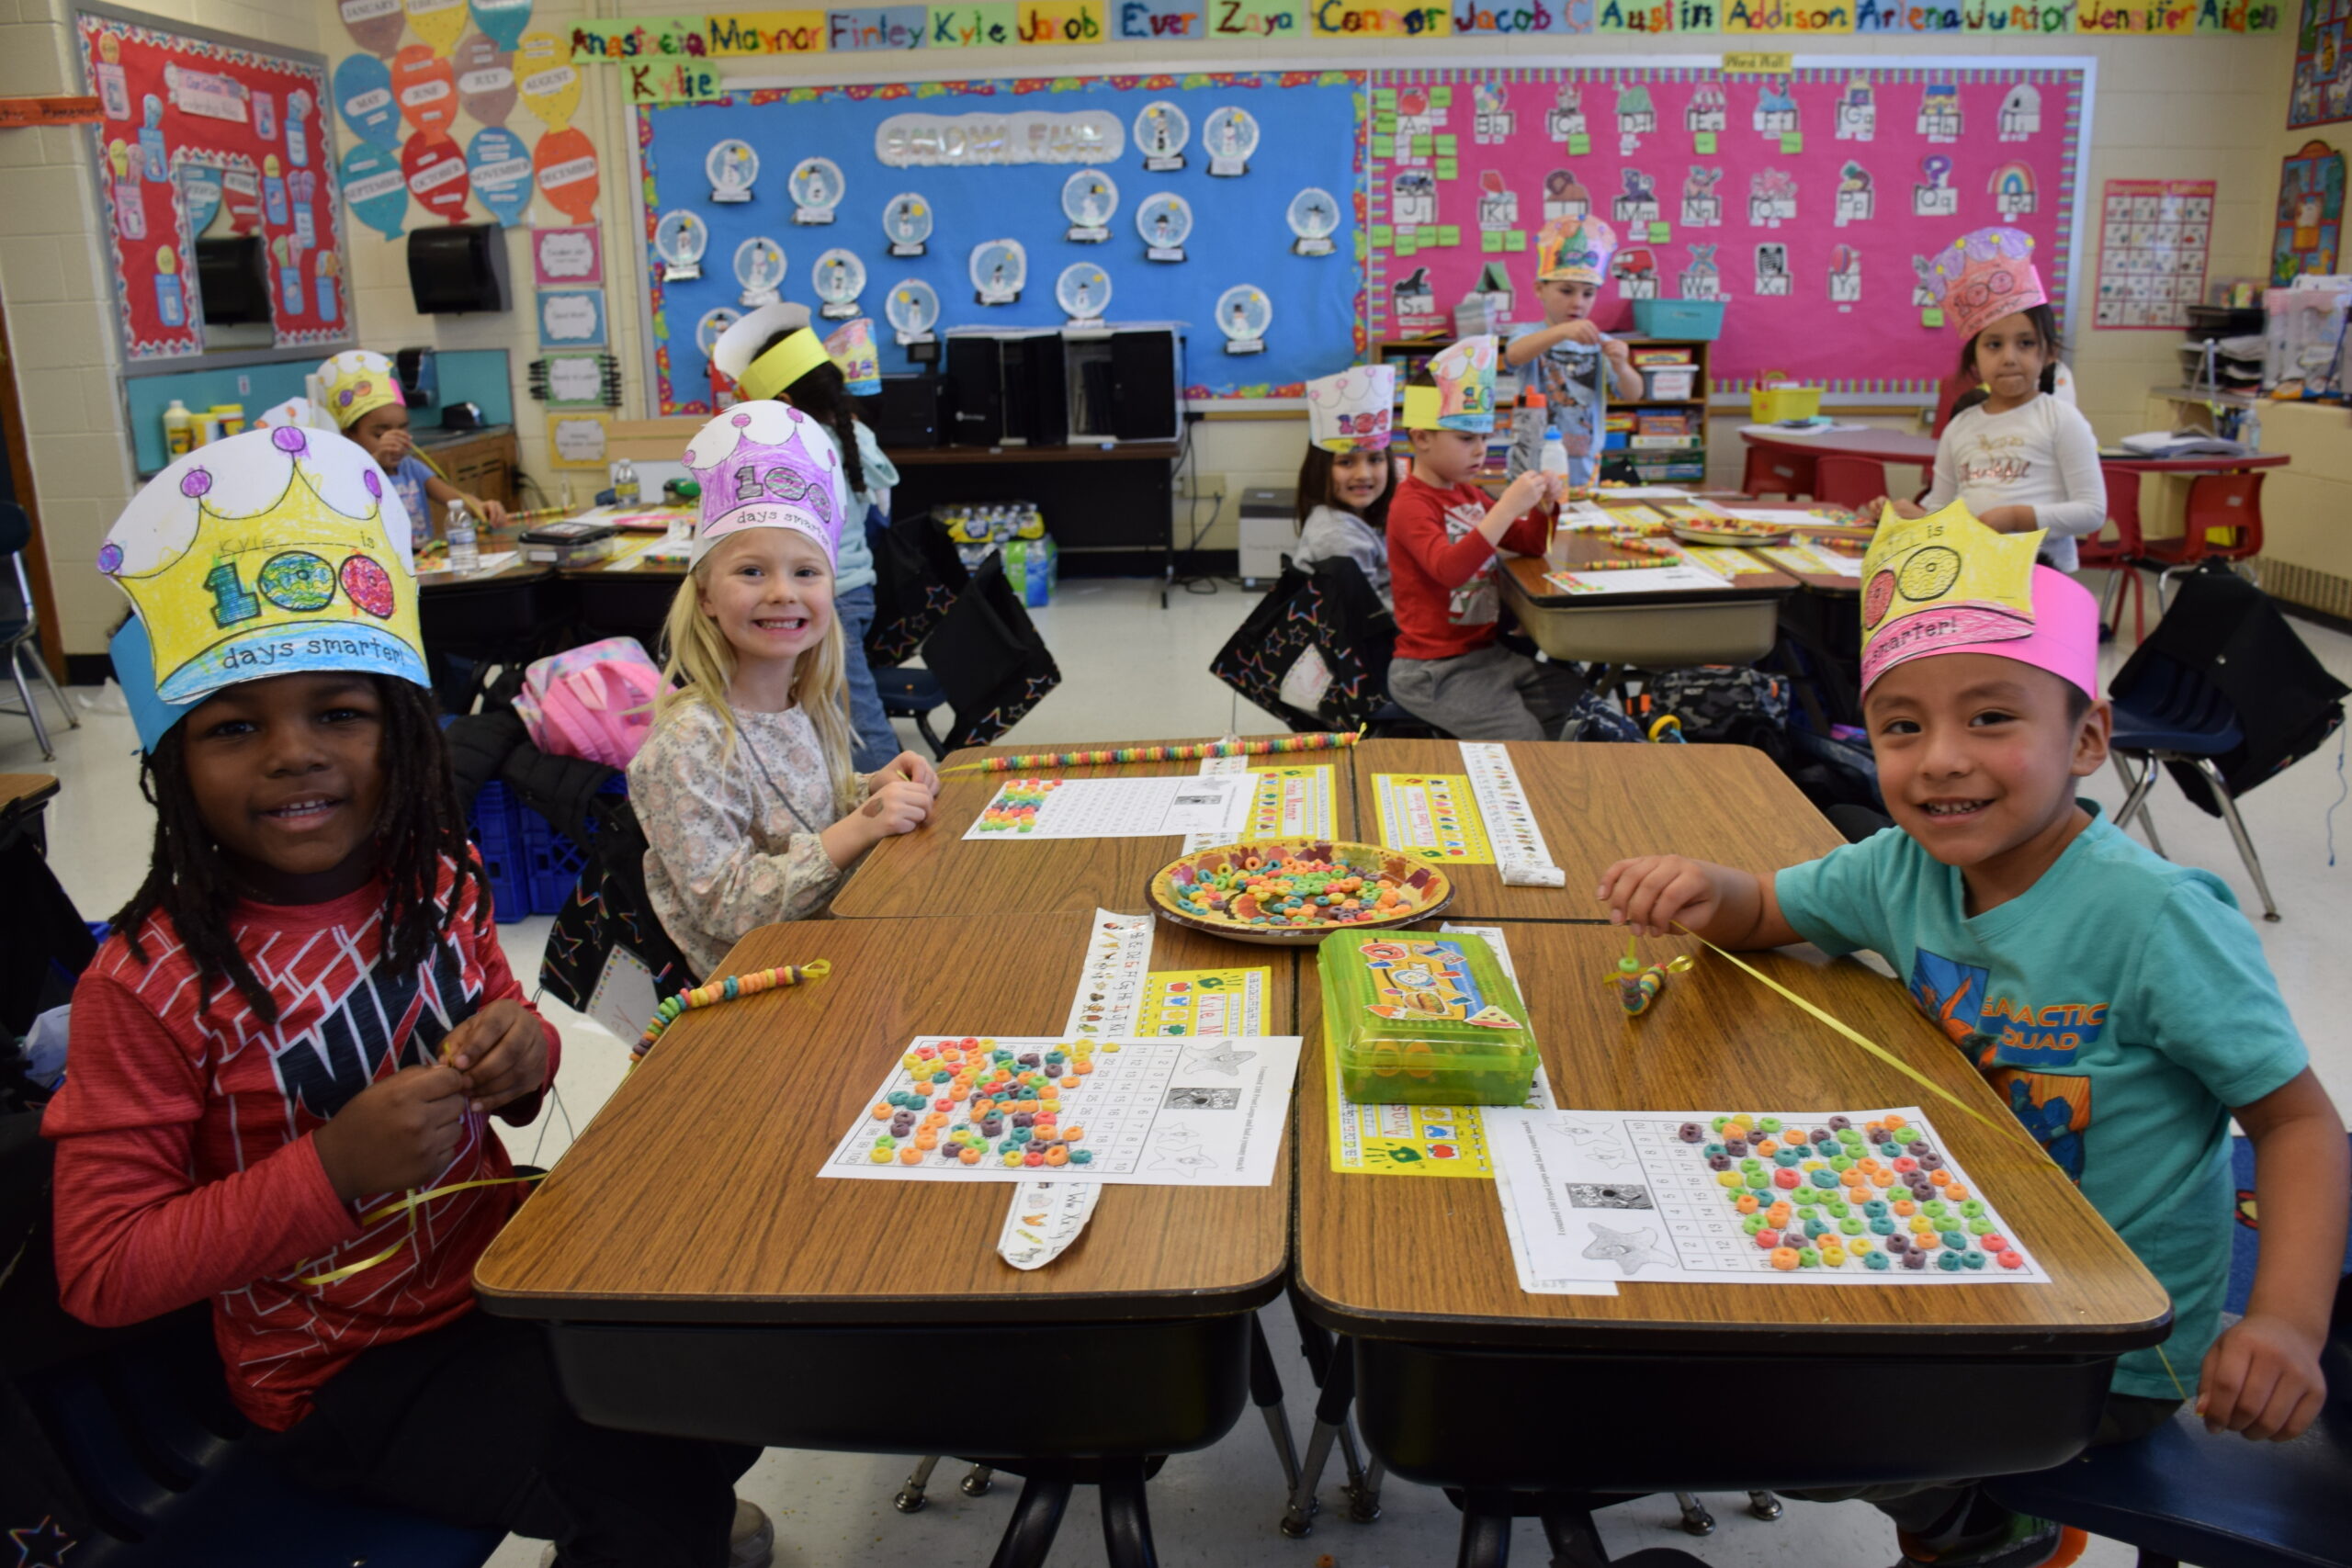 Westhampton Beach Elementary School was filled with celebration on February 13 as students and staff marked the completion of the first 100 days of school with an array of fun-filled learning activities. Kindergartners recognized the 100th day by wearing 100 Days of School hats and practicing their counting skills through a variety of counting activities. COURTESY WESTHAMPTON BEACH SCHOOL DISTRICT